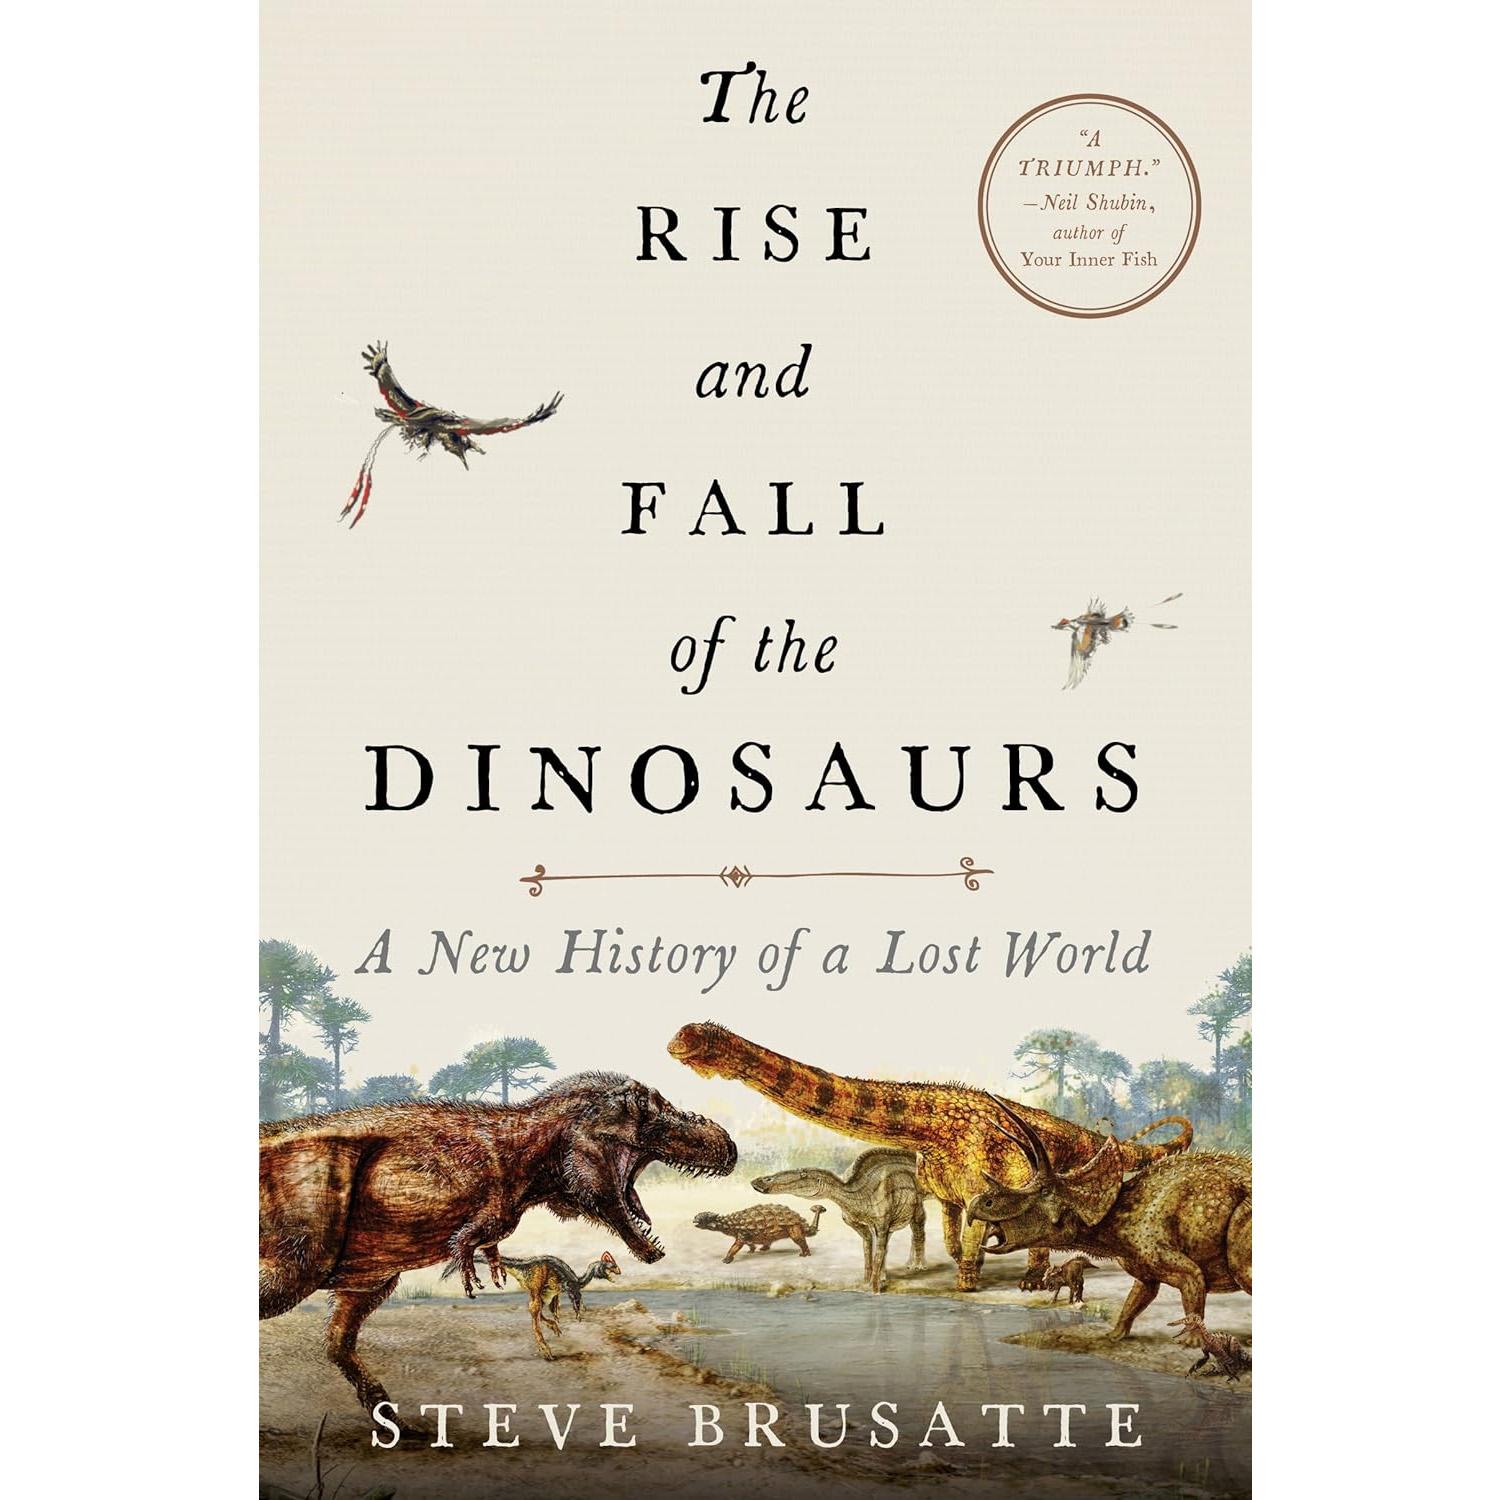 The Rise and Fall of the Dinosaurs eBook for $1.99